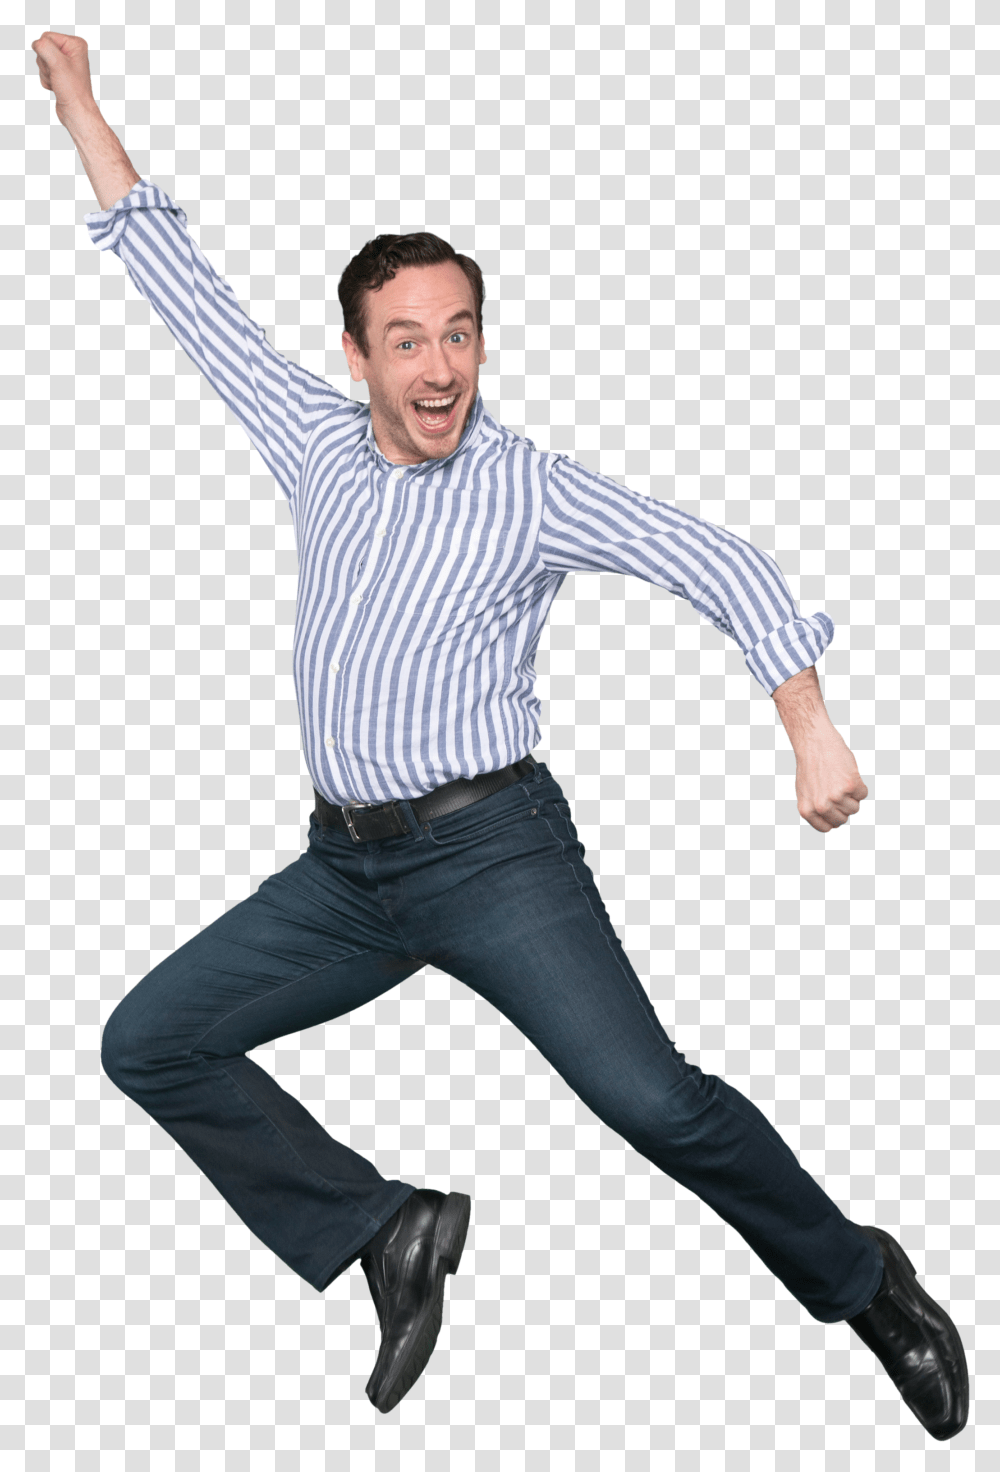 Jumping Person Robbie Eicher Jumping 1741605 Vippng Smart Casual, Sleeve, Clothing, Long Sleeve, Dance Pose Transparent Png